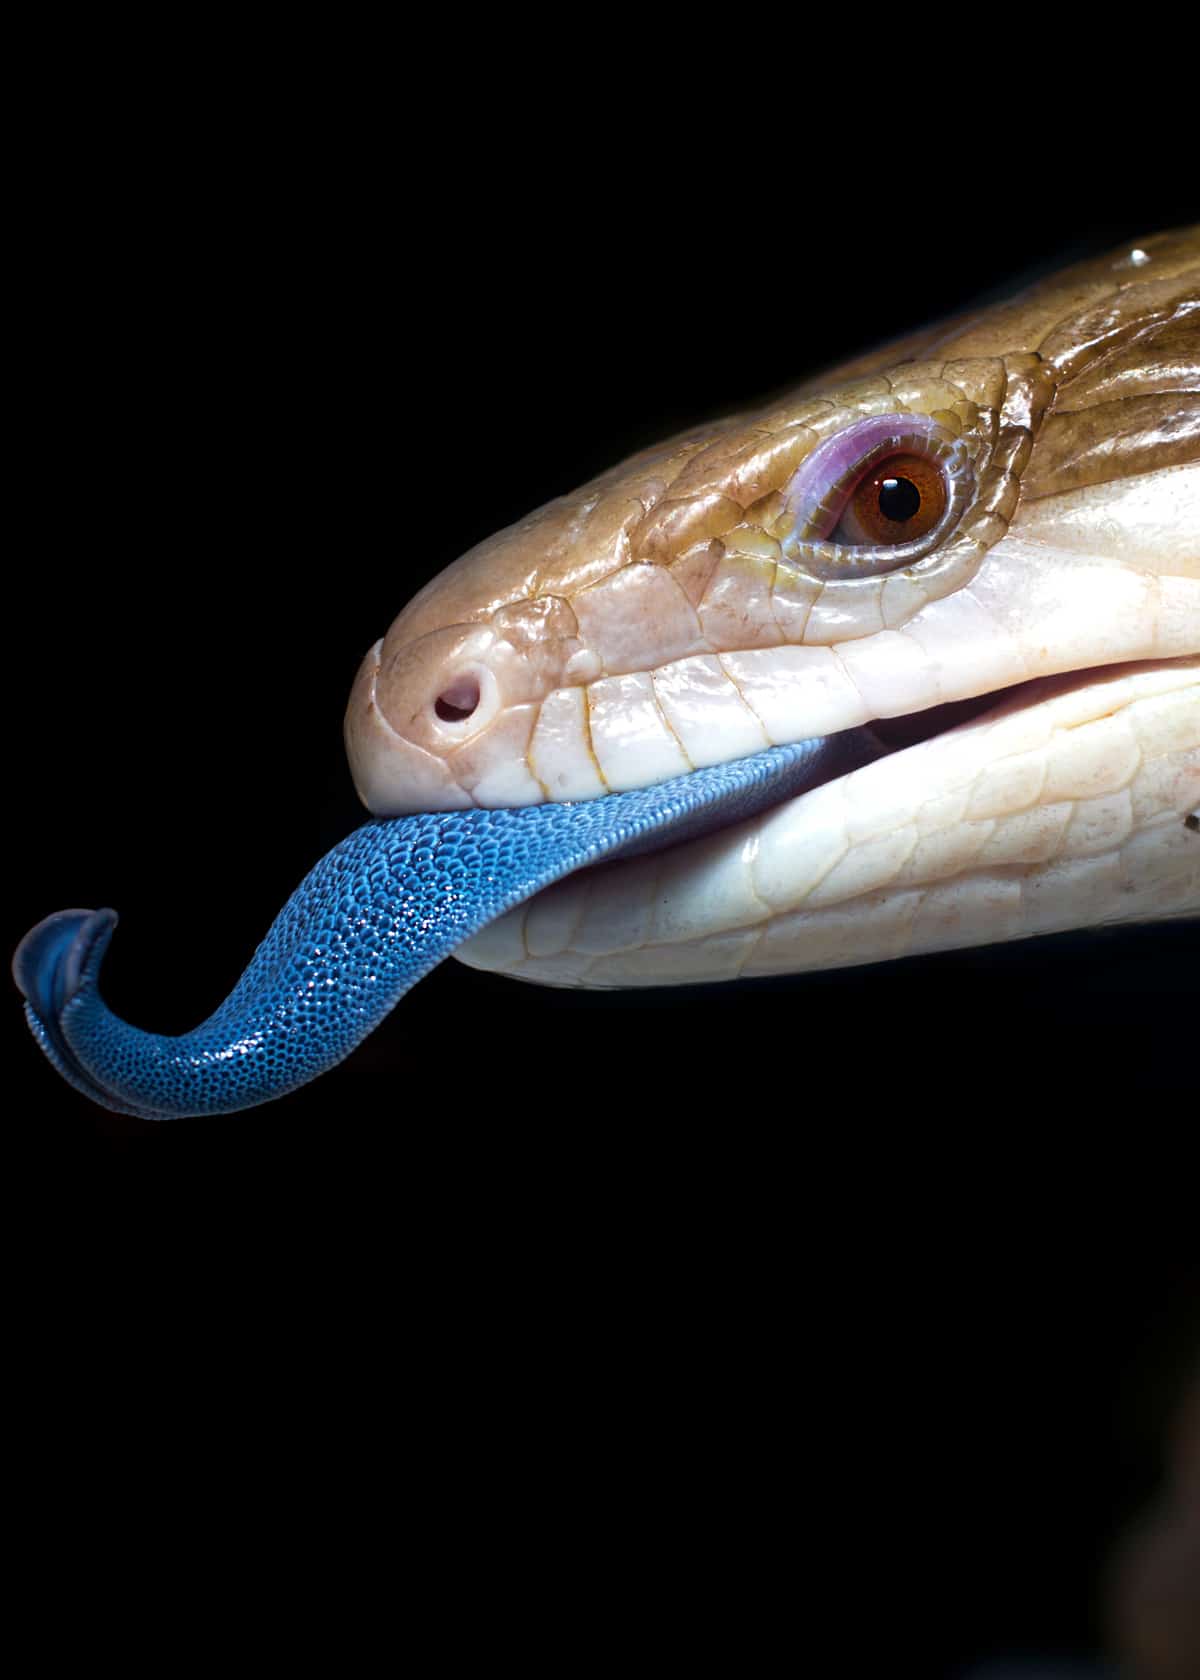 Blue-tongued skink facts